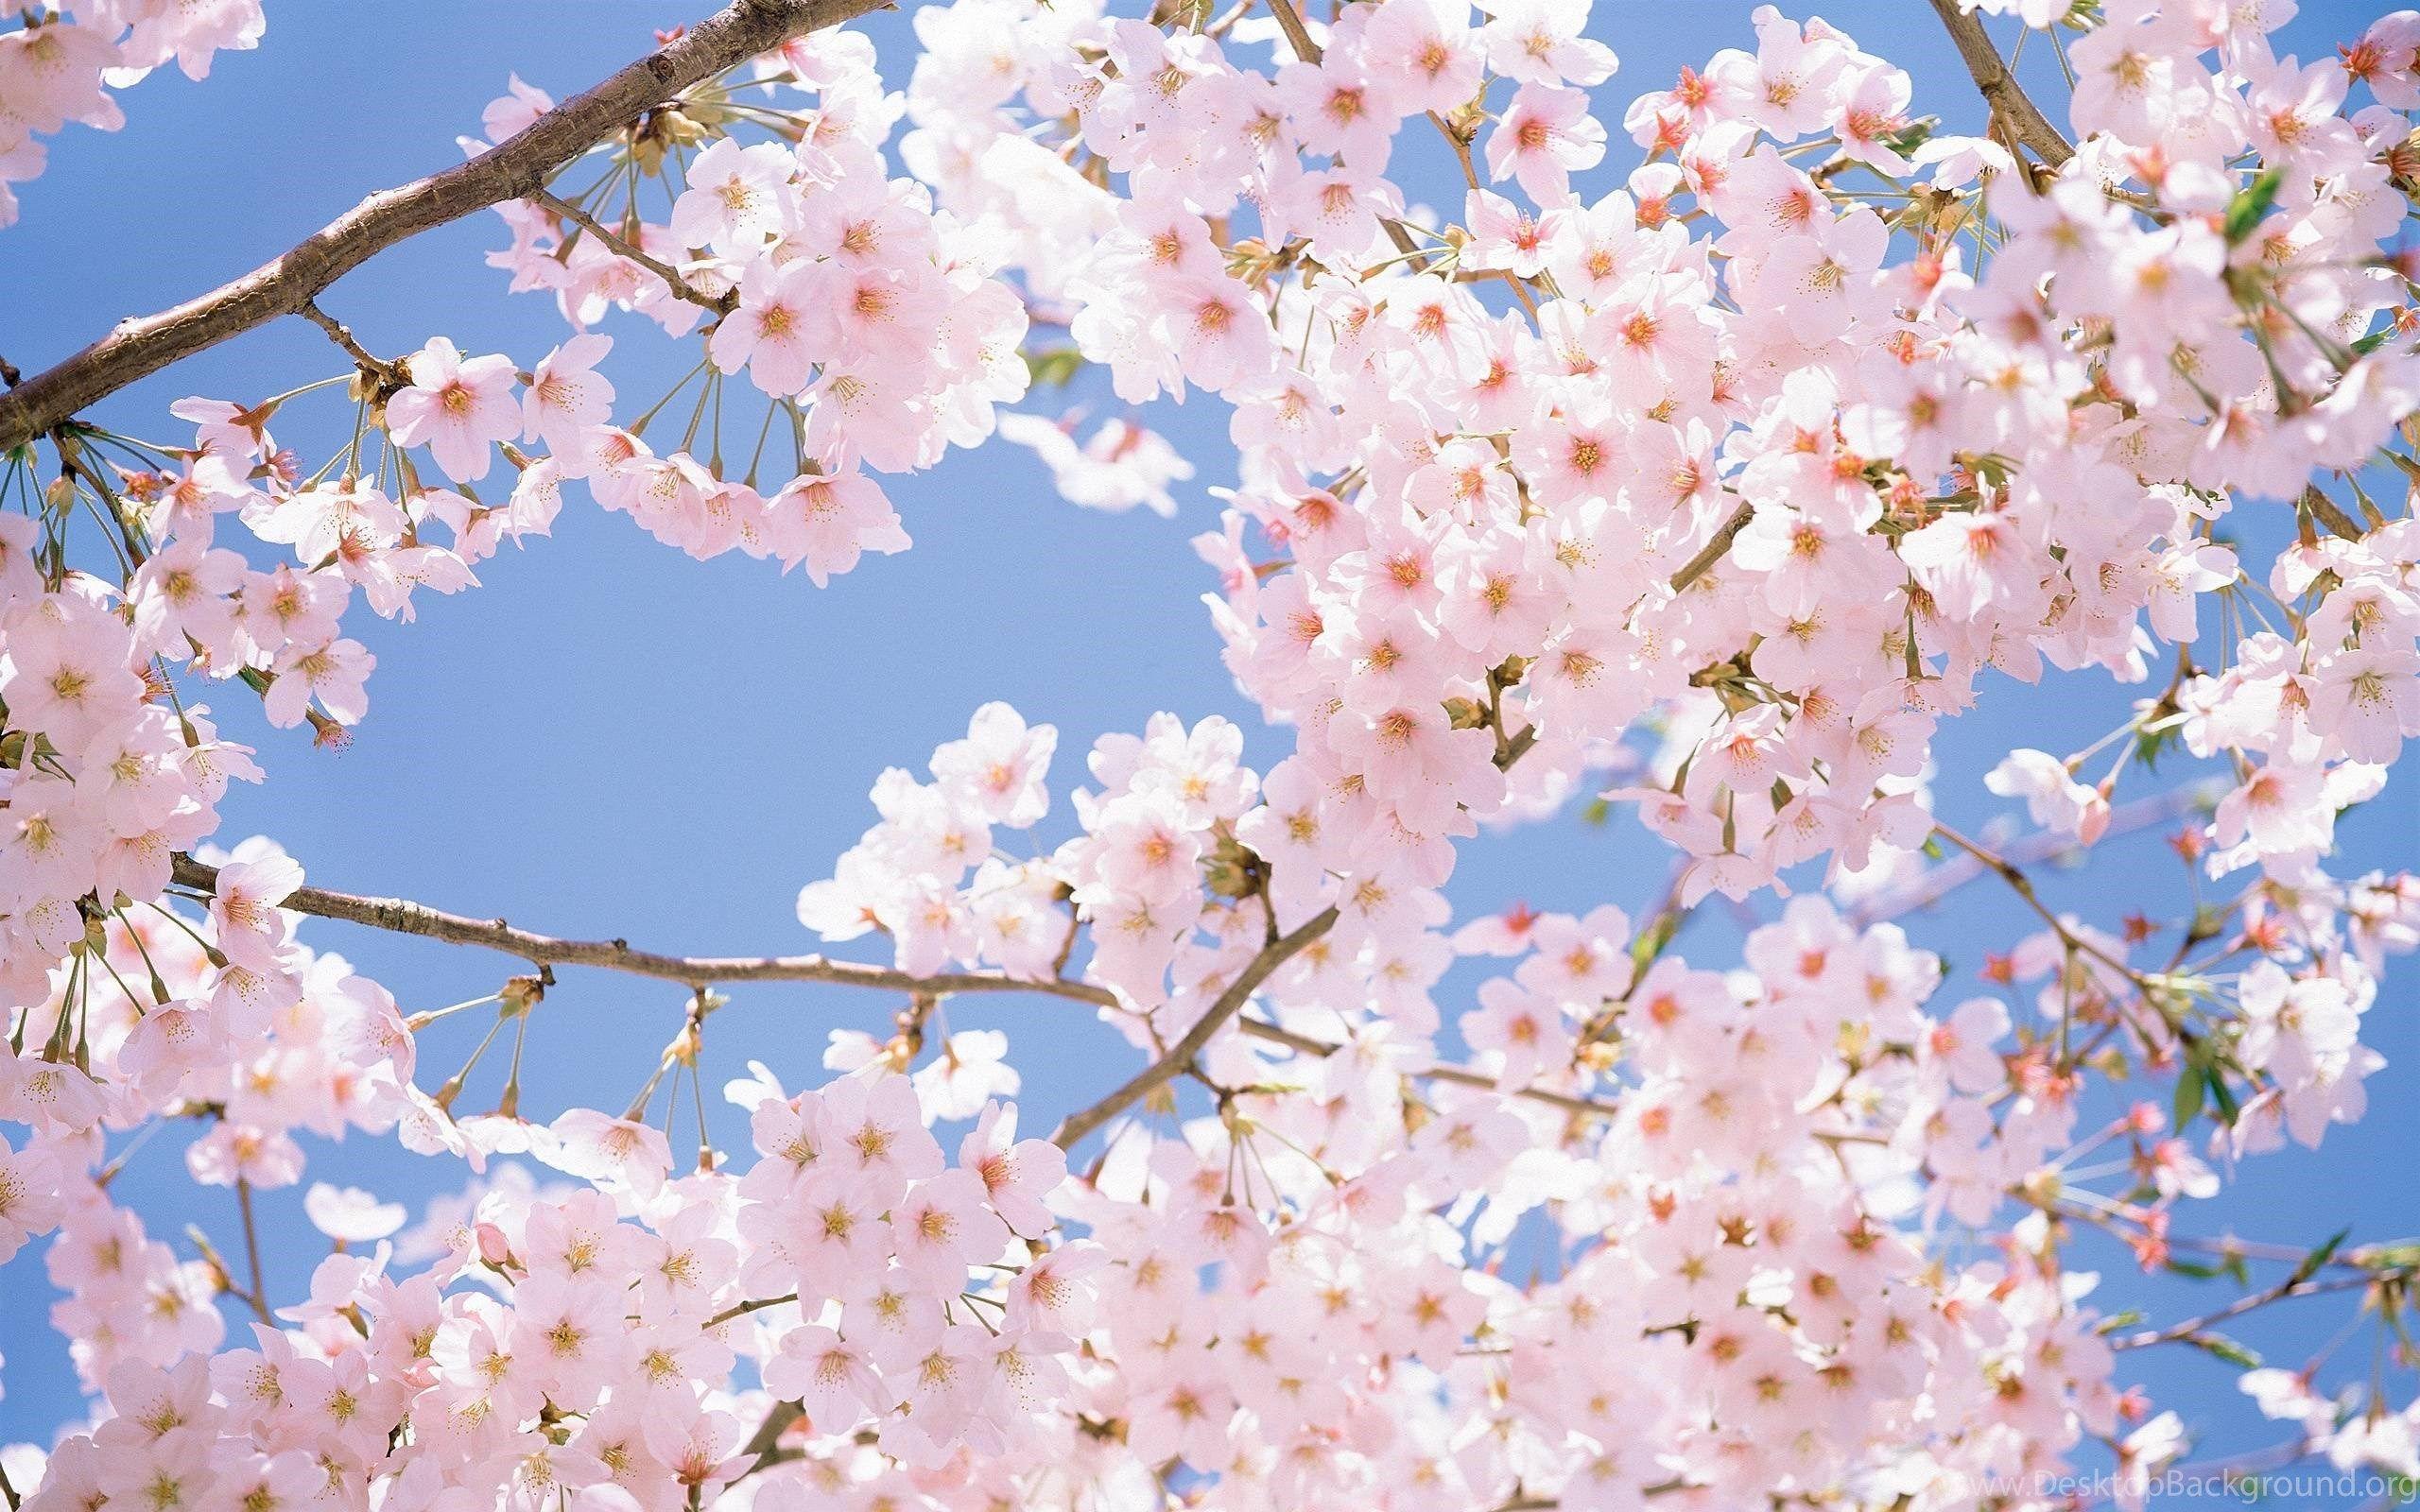 Japan Cherry Blossom Tree Wallpapers - Top Free Japan Cherry Blossom